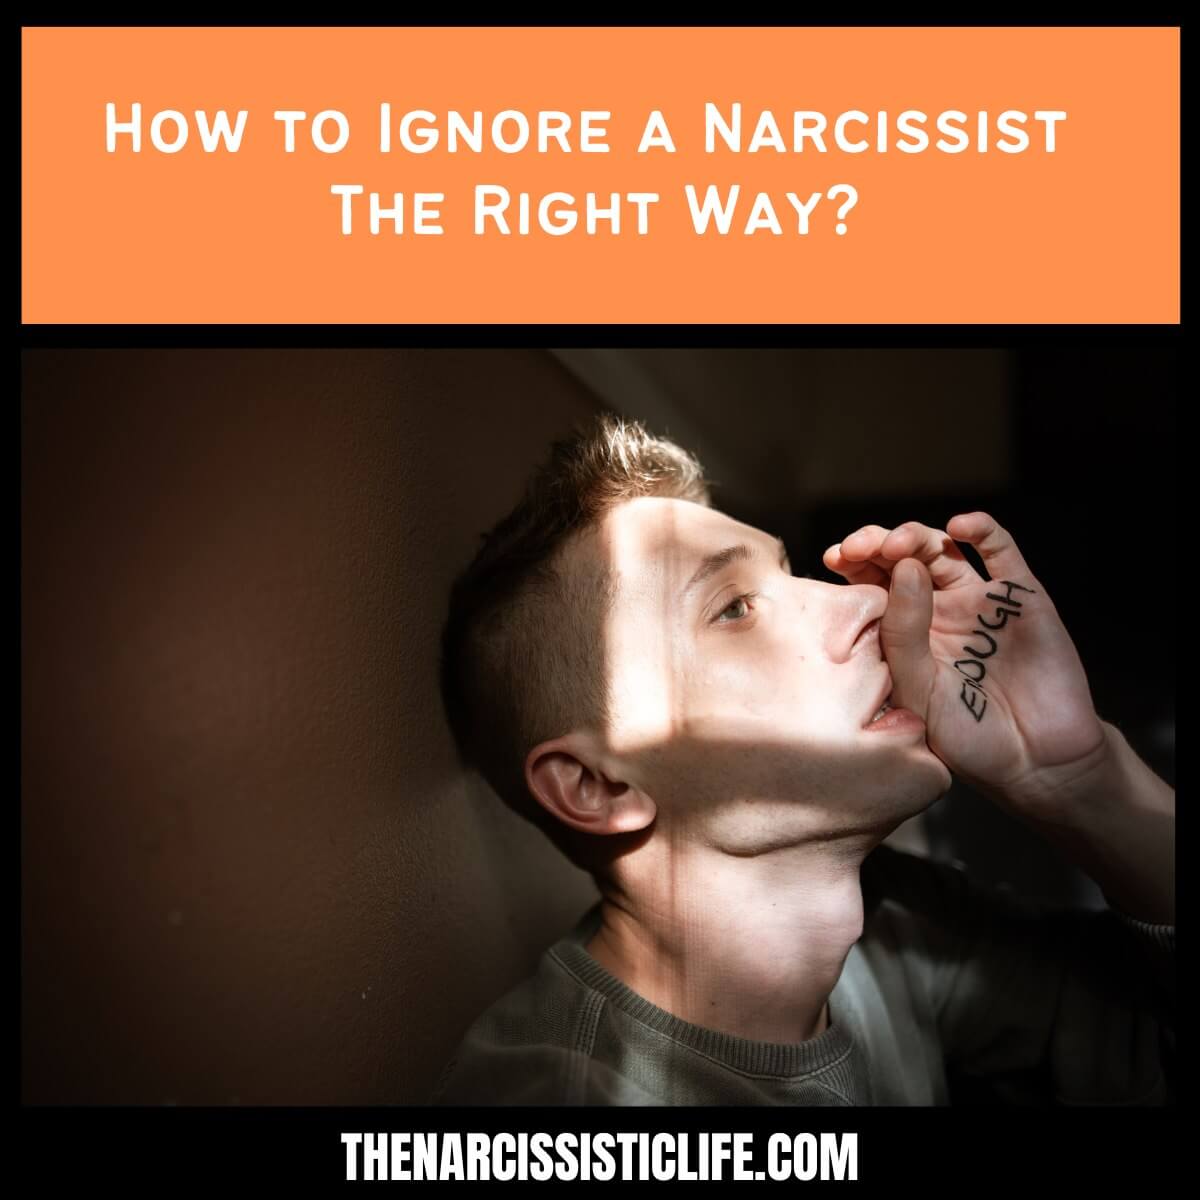 How to Ignore a Narcissist The Right Way